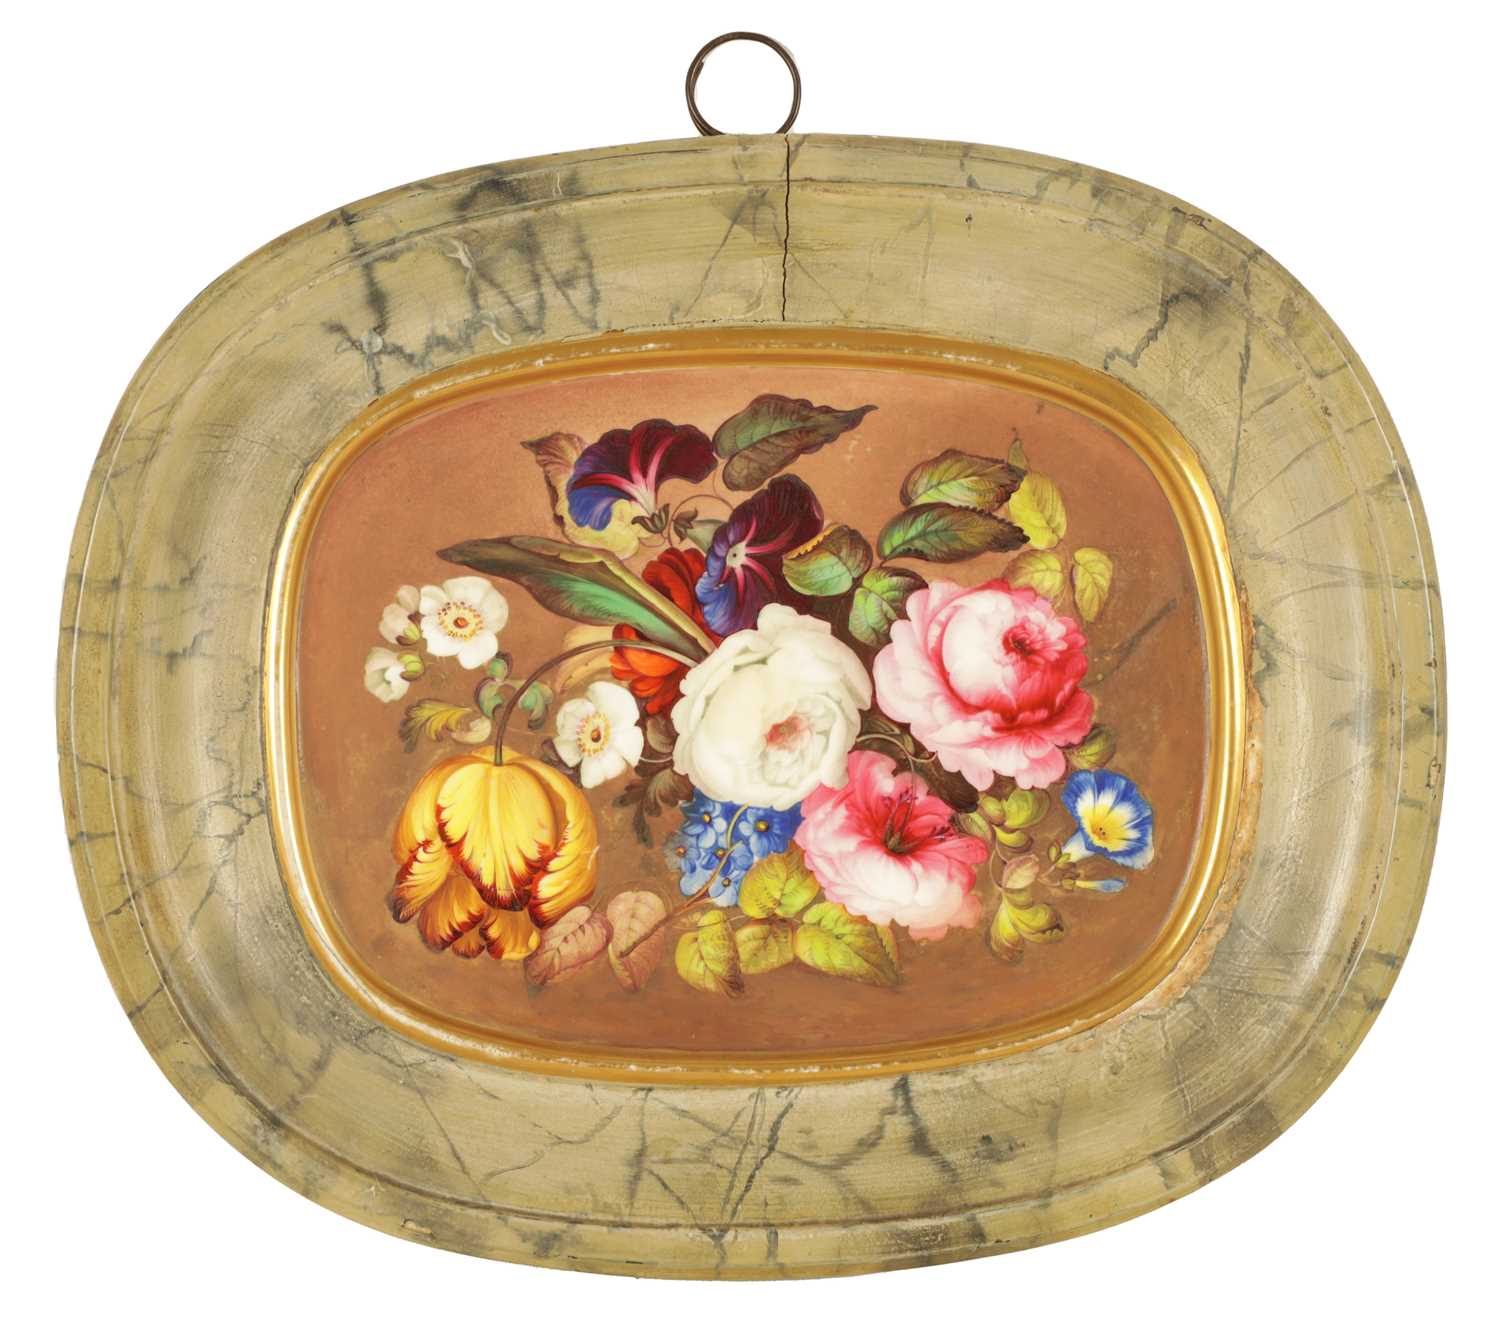 A 19TH CENTURY ROYAL CROWN DERBY TYPE PORCELAIN PLAQUE IN THE MANNER OF JAMES ROUSE